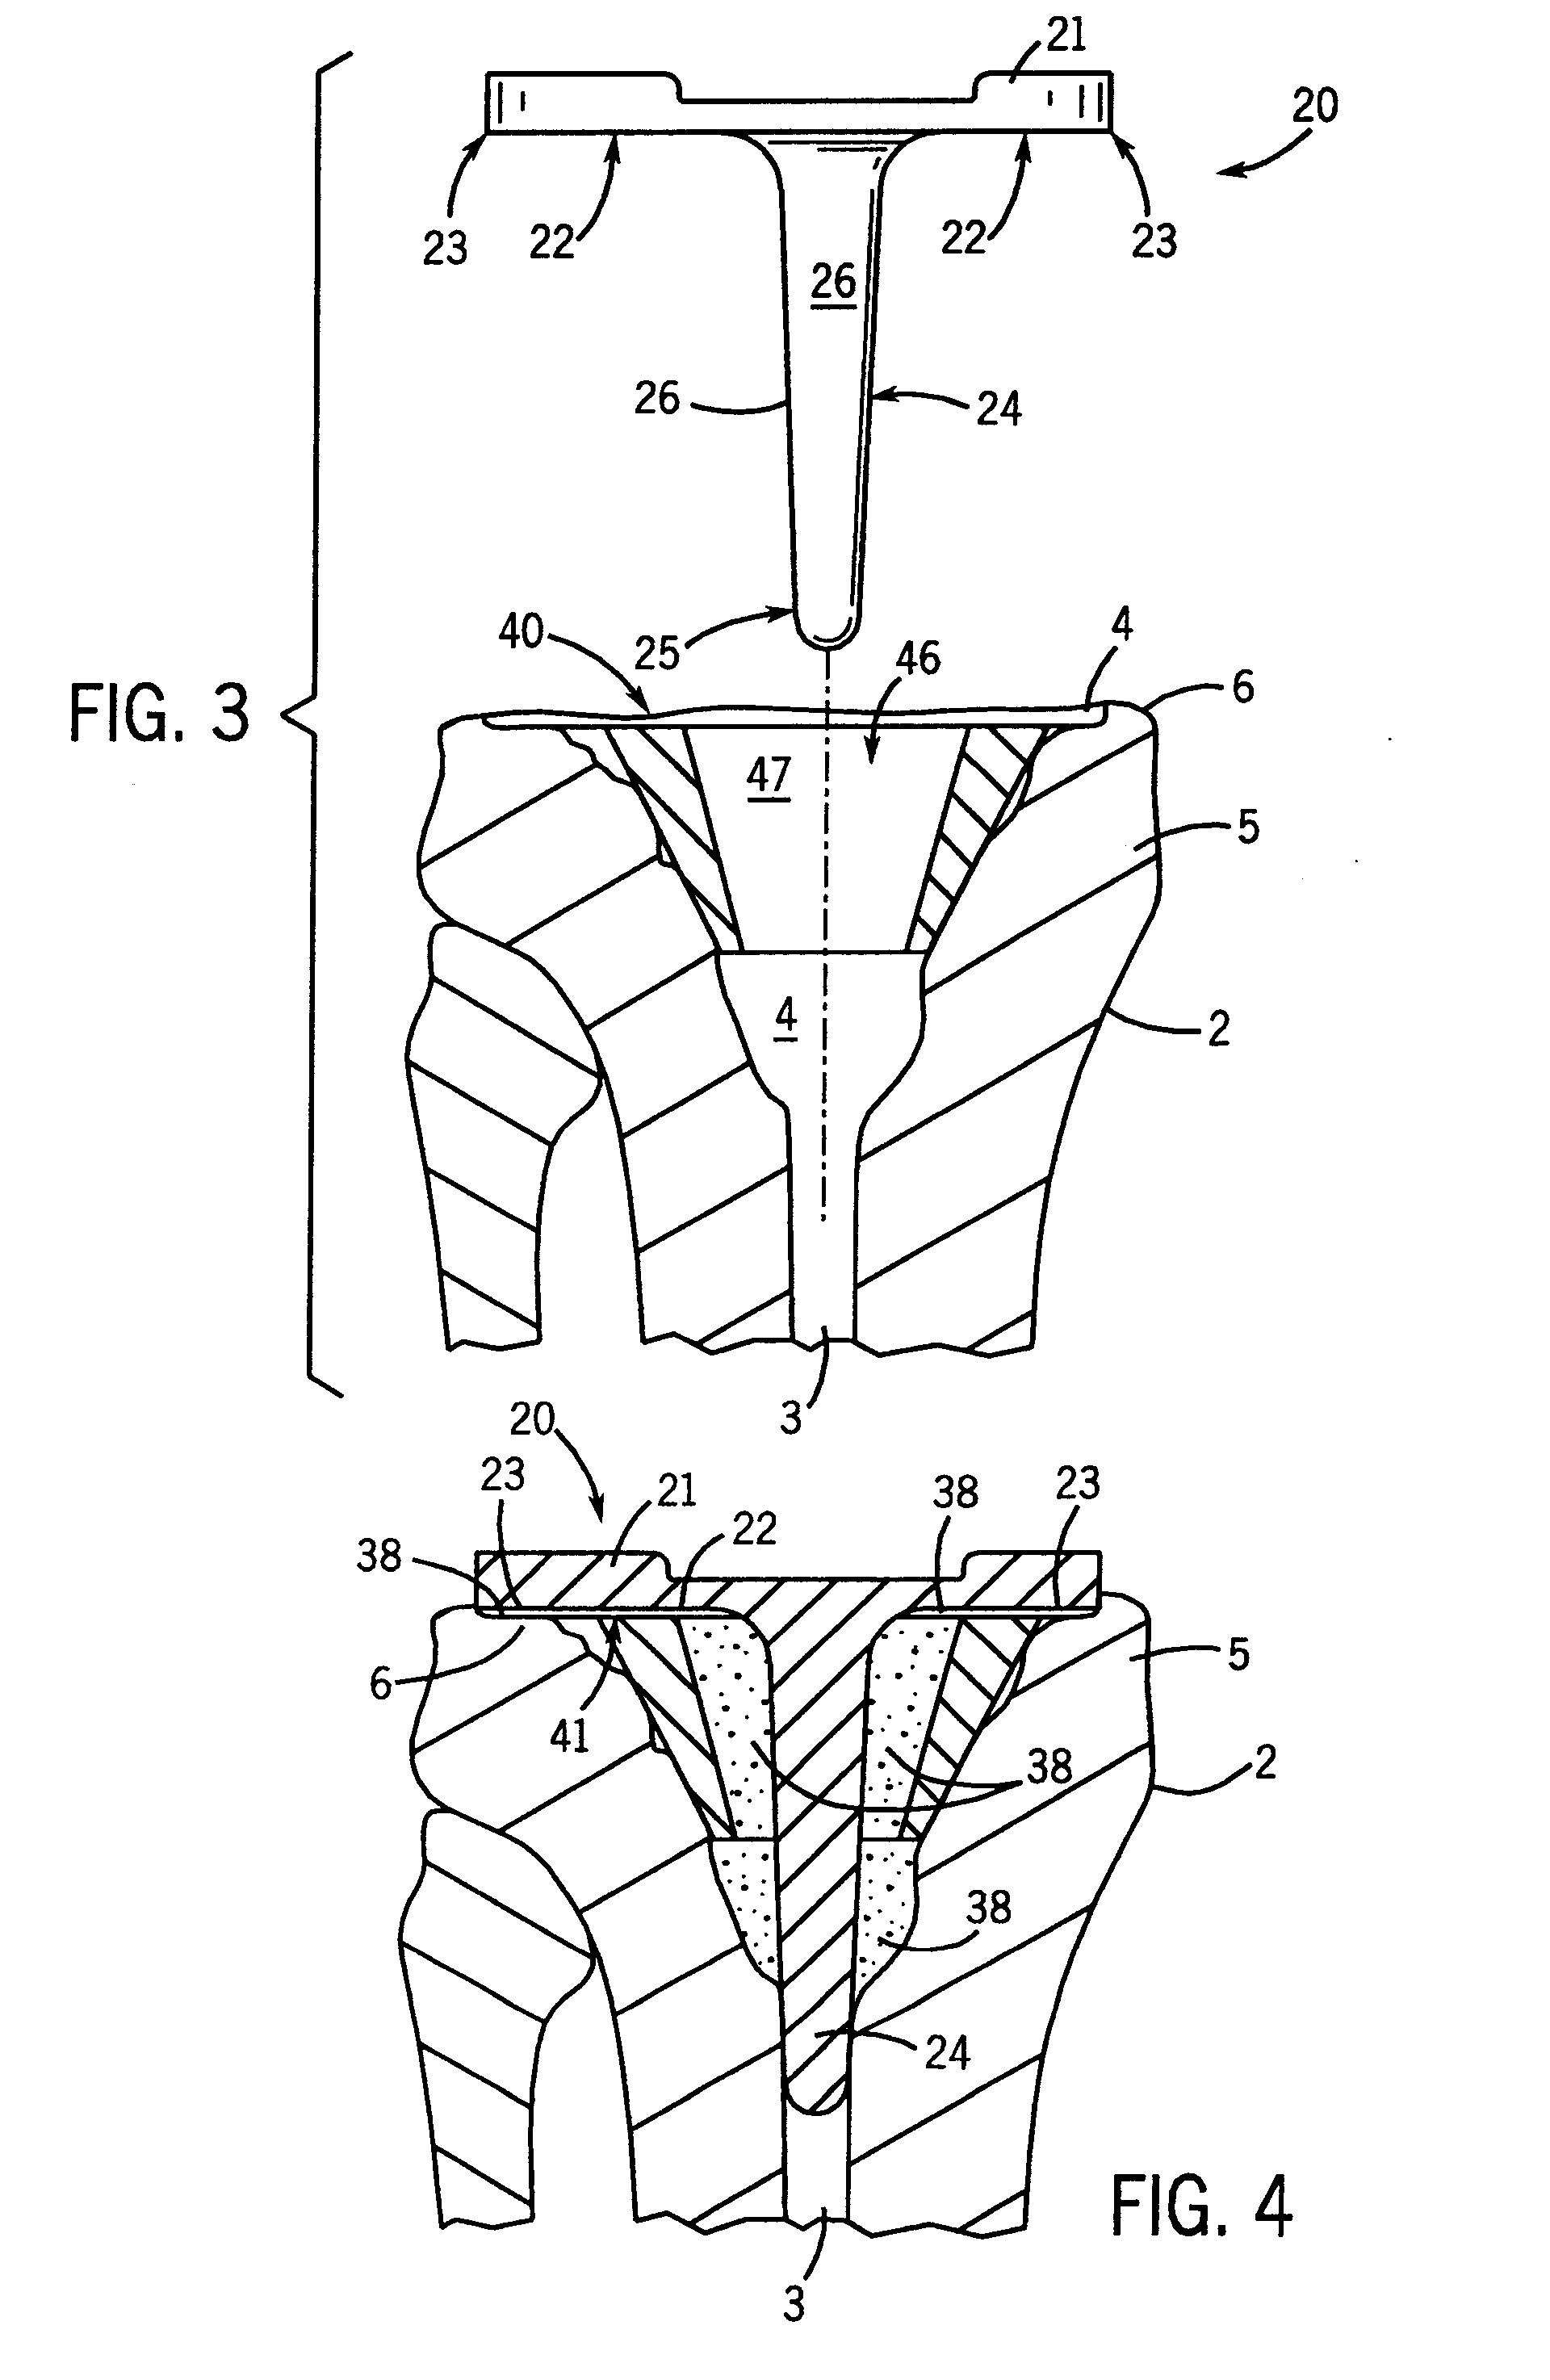 Prosthetic implant support structure